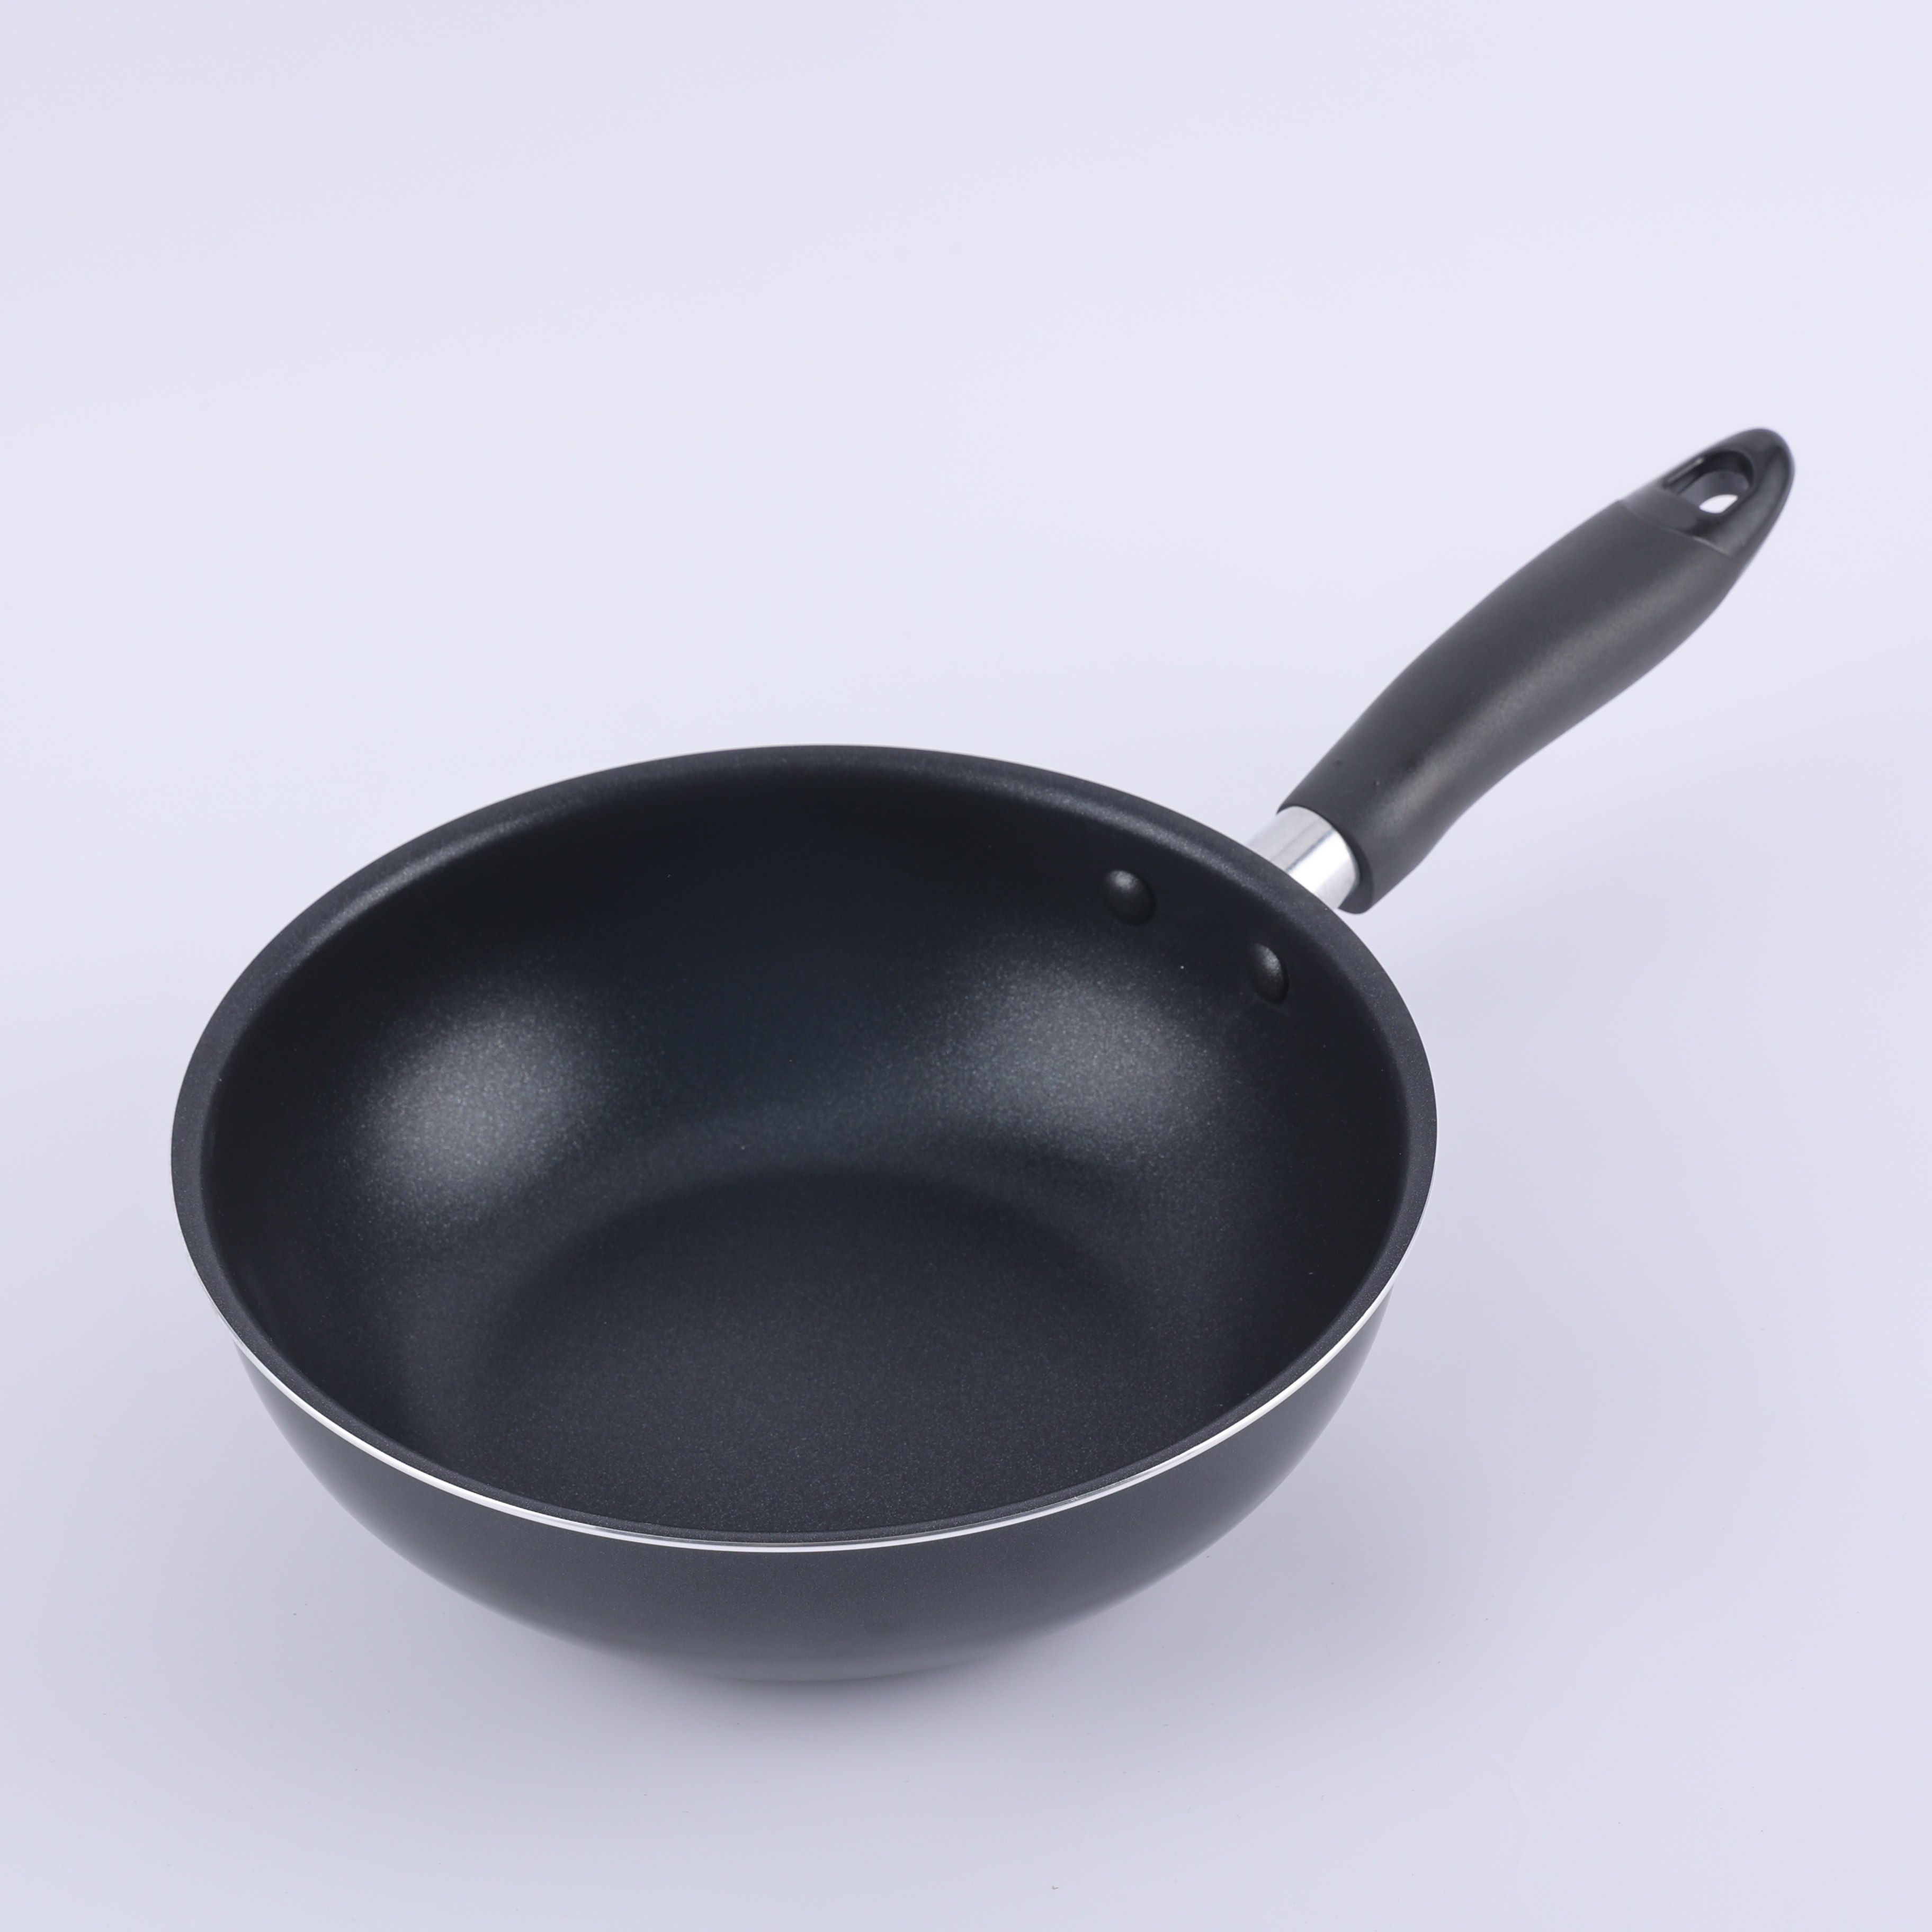 

Kangshida 8-inch Black Non-stick Skillet - Perfect For Eggs, Omelets & More - Compatible With Gas Stove Top